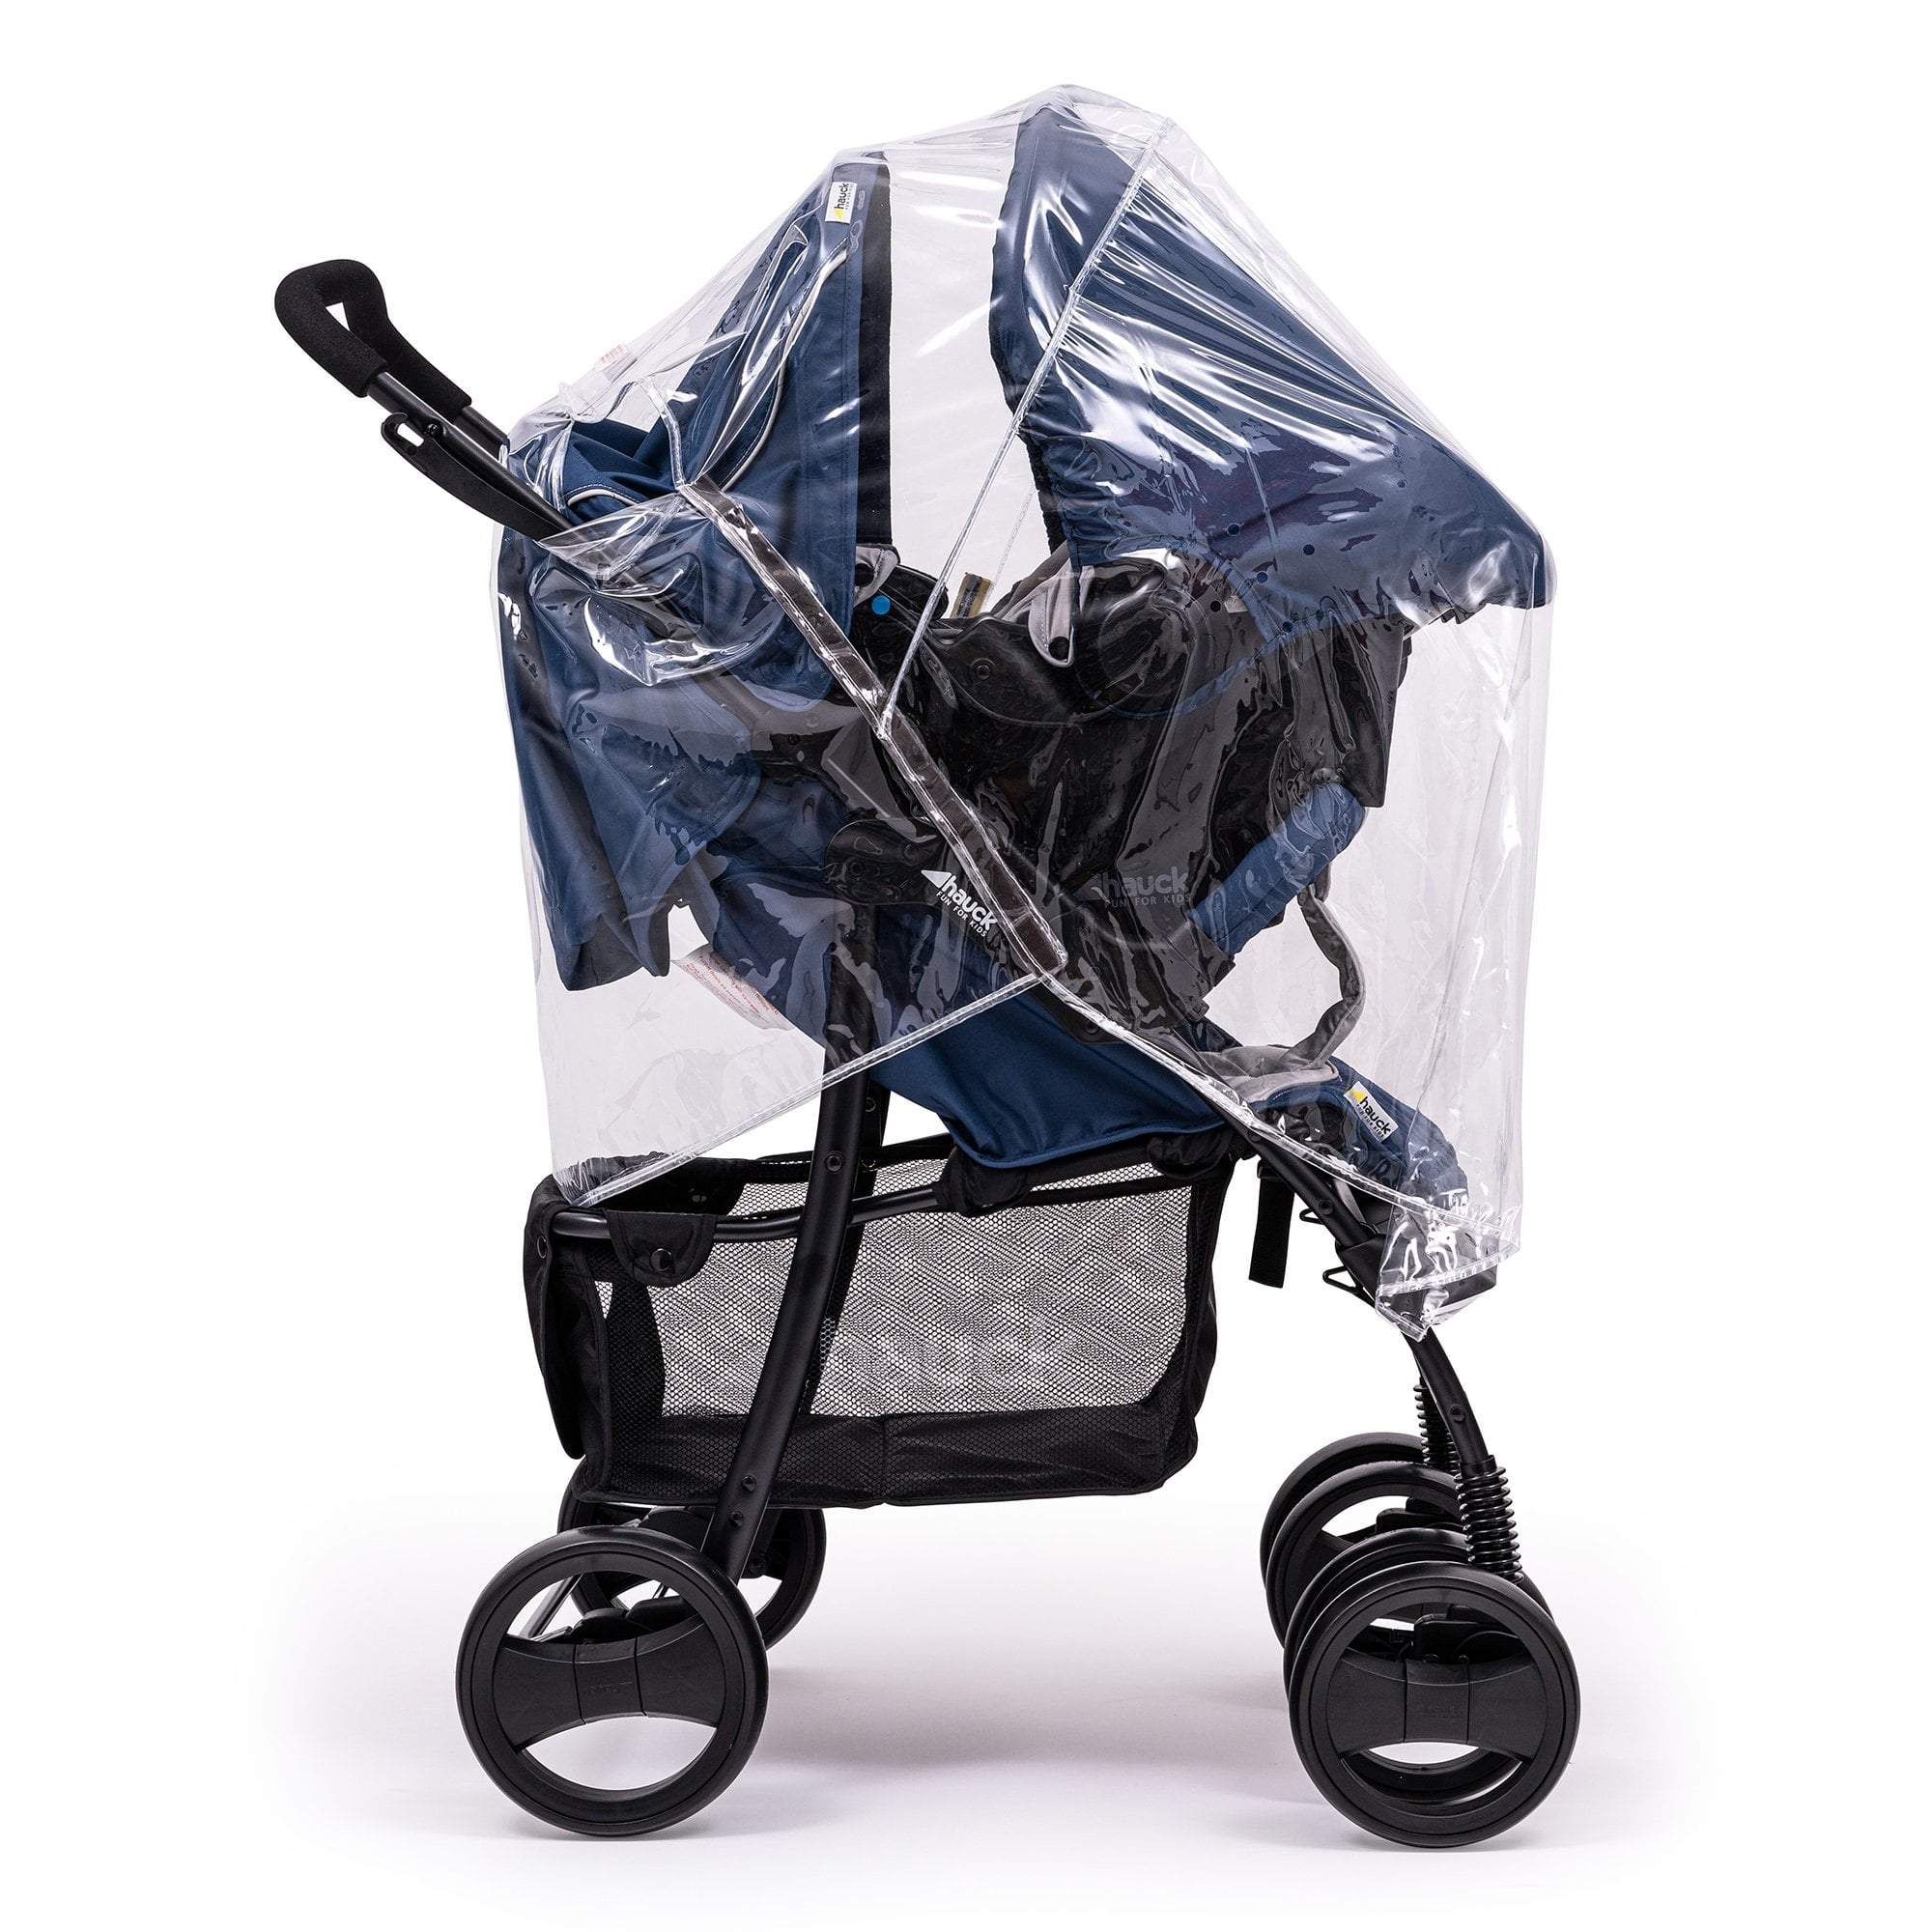 Travel System Raincover Compatible with Maclaren - Fits All Models -  | For Your Little One